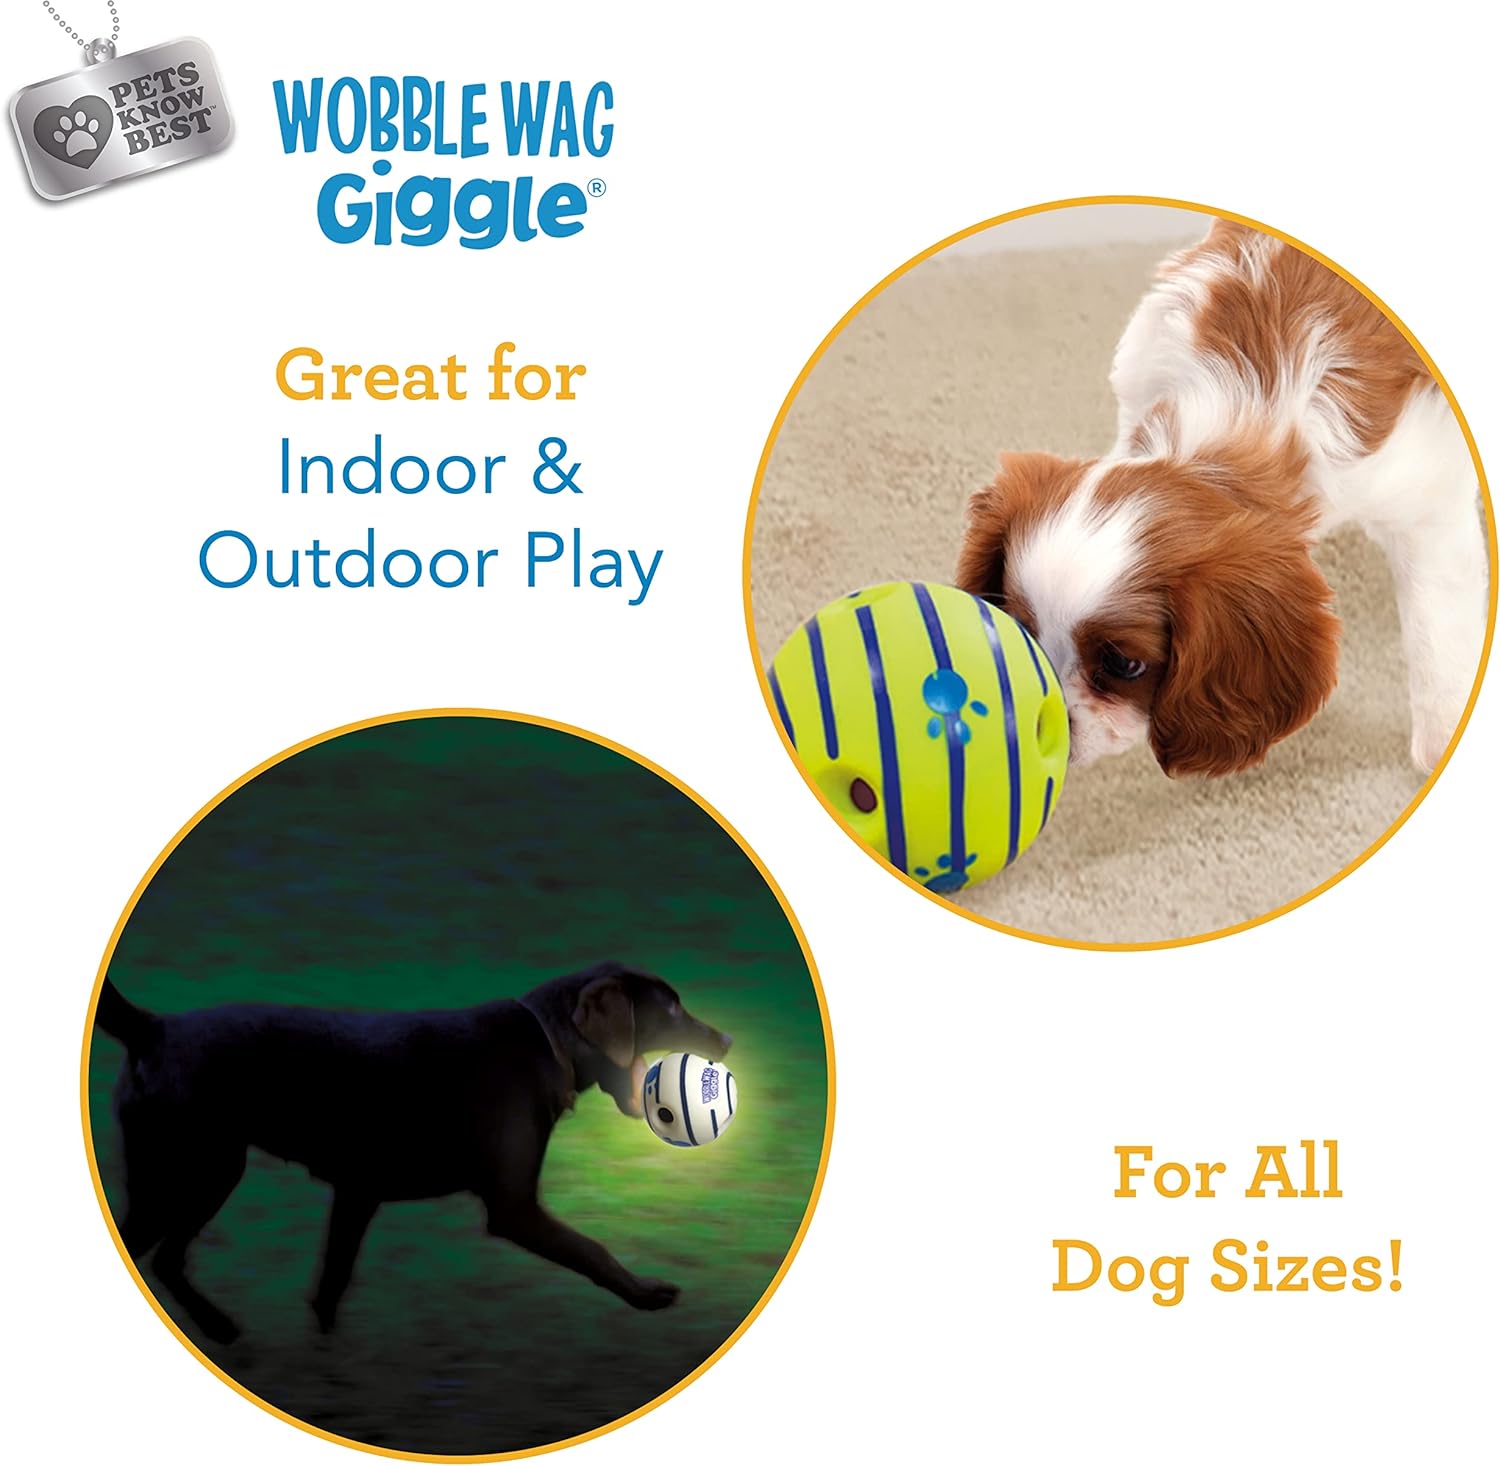 Wobble Wag Giggle Ball, Interactive Dog Toy, Fun Giggle Sounds When Rolled or Shaken, Pets Know Best, As Seen On TV Medium